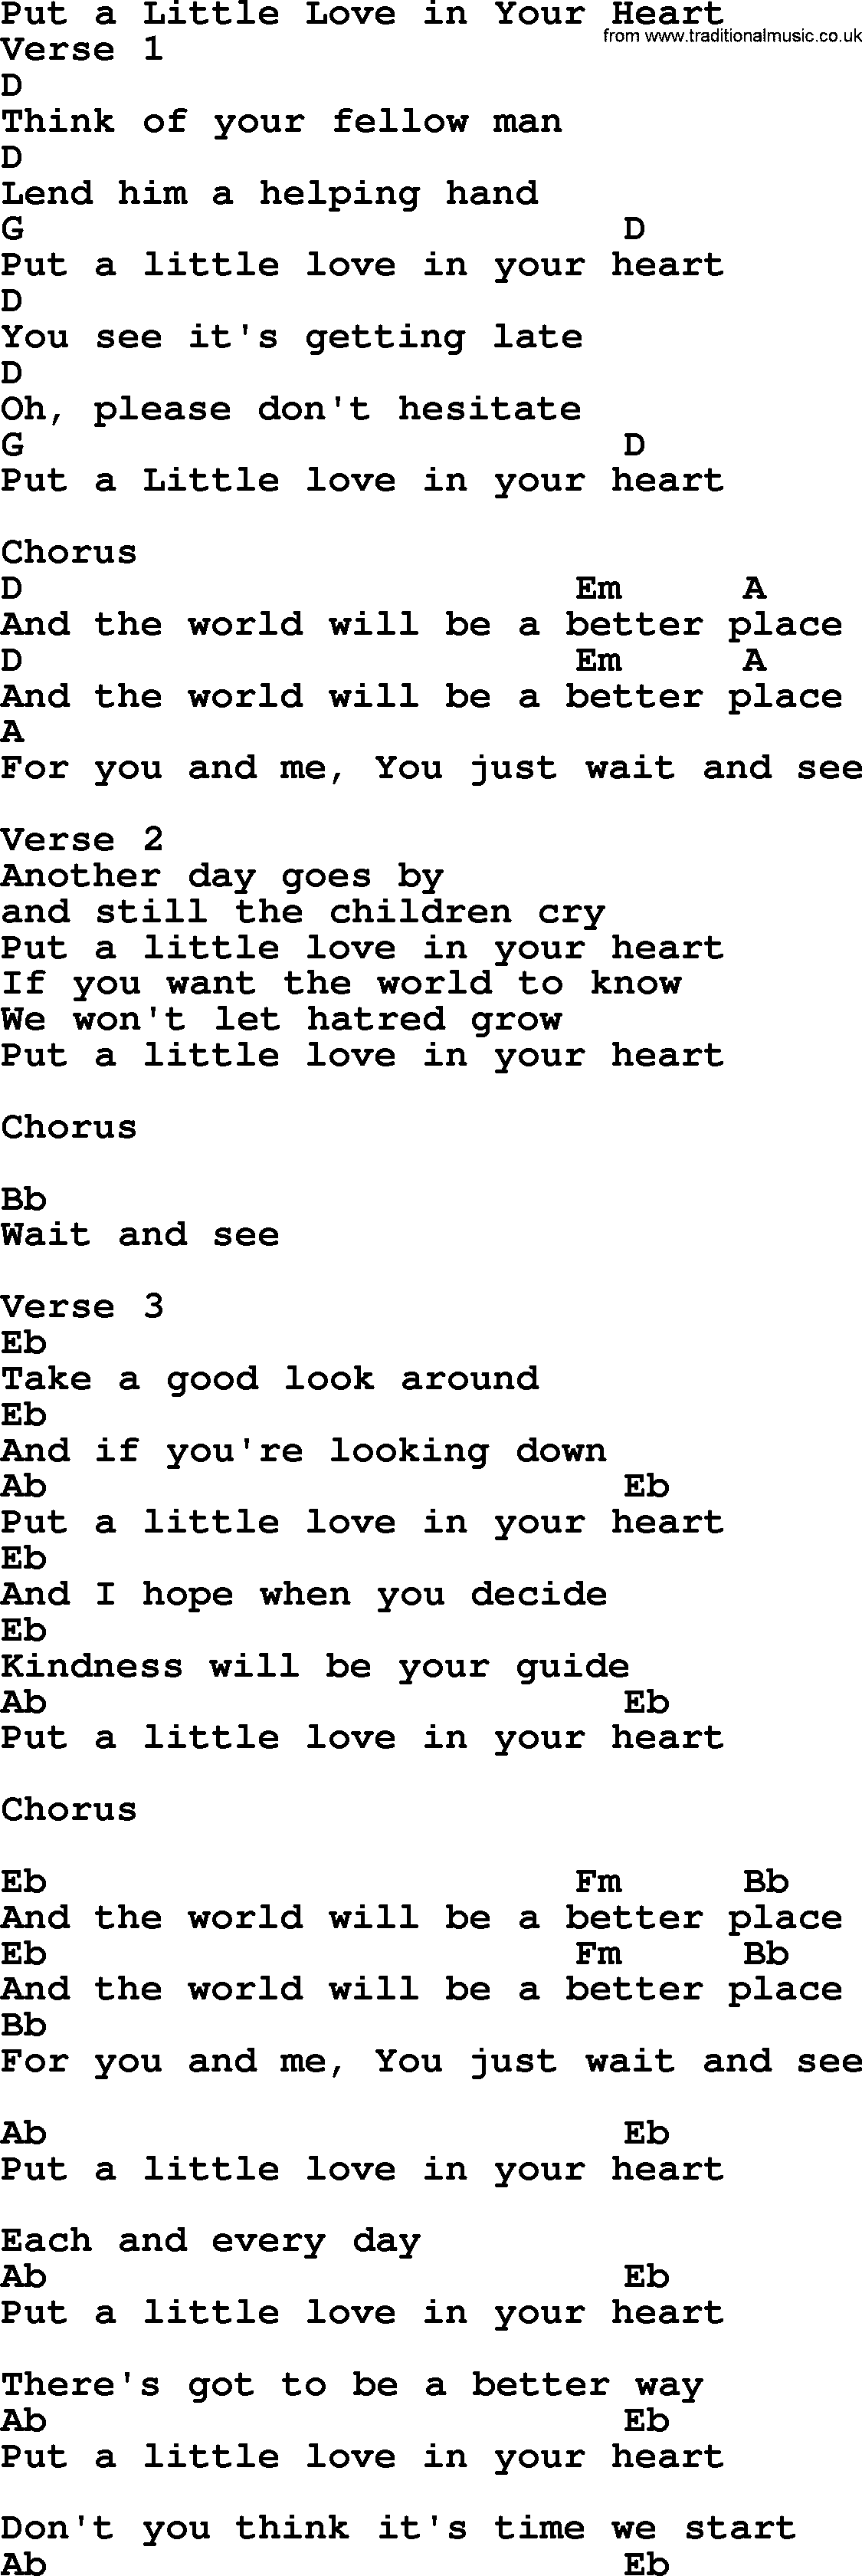 Bluegrass song: Put A Little Love In Your Heart, lyrics and chords